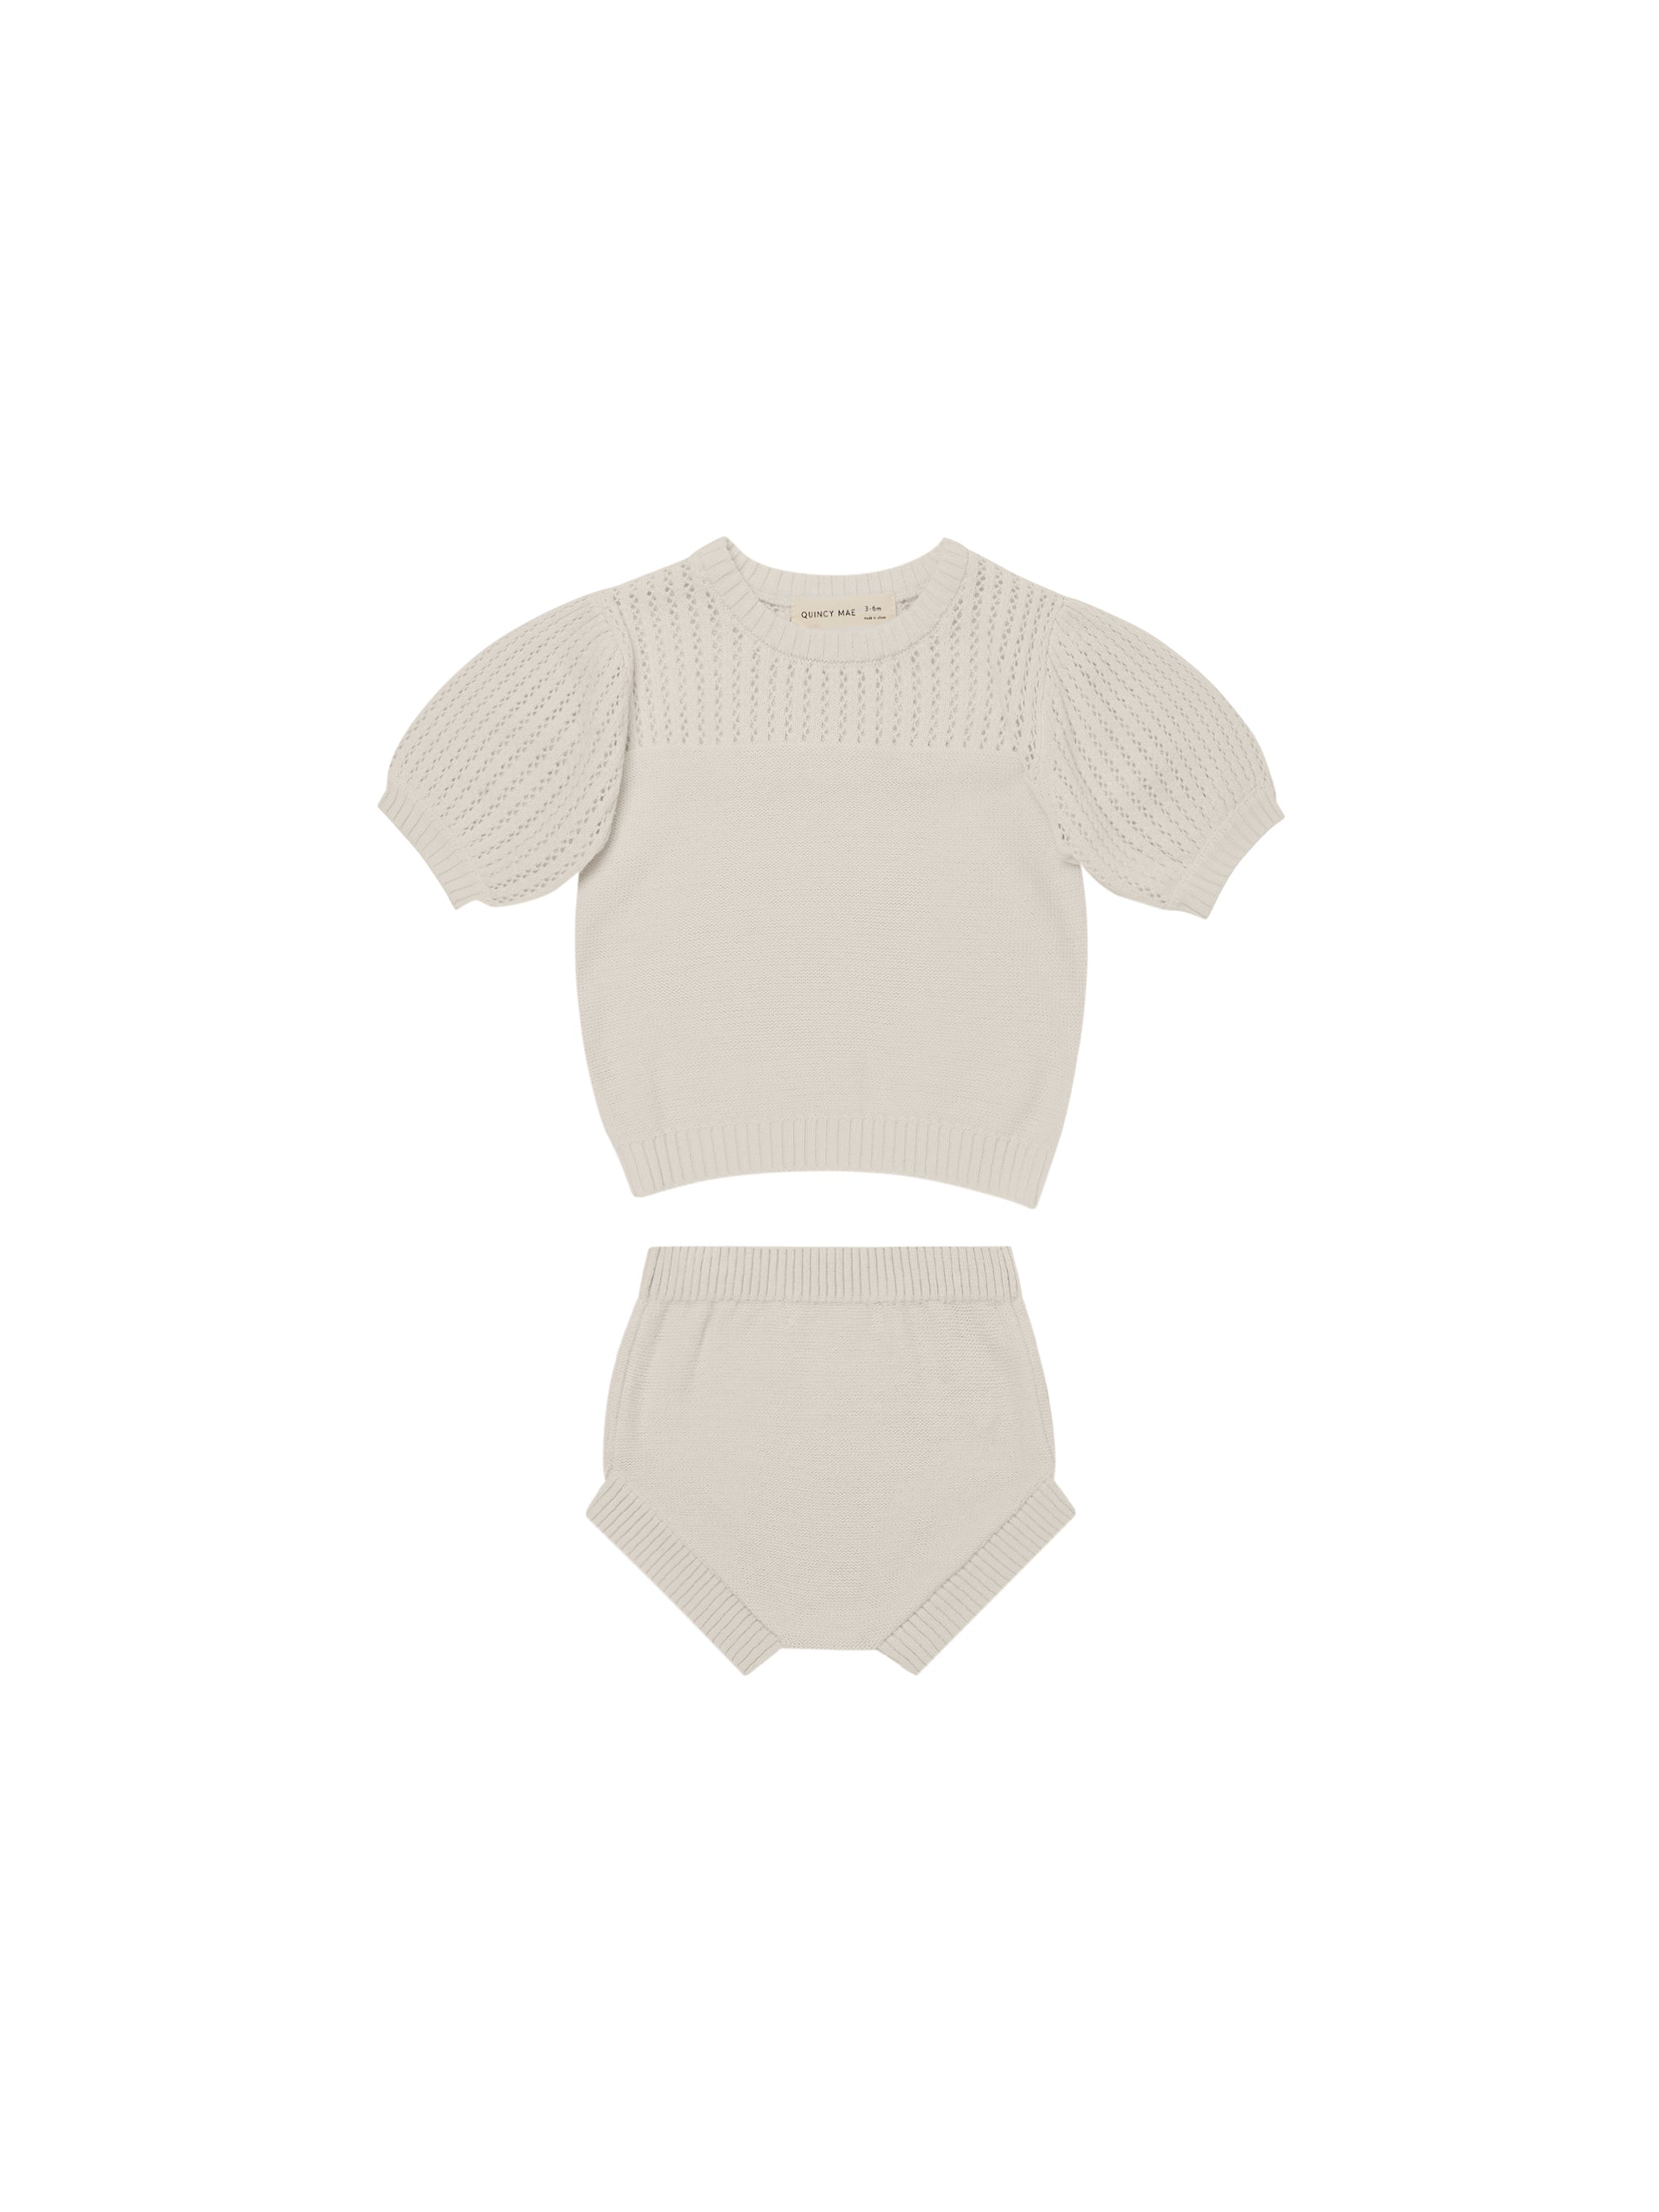 Quincy Mae Pointelle Knit Set - Natural